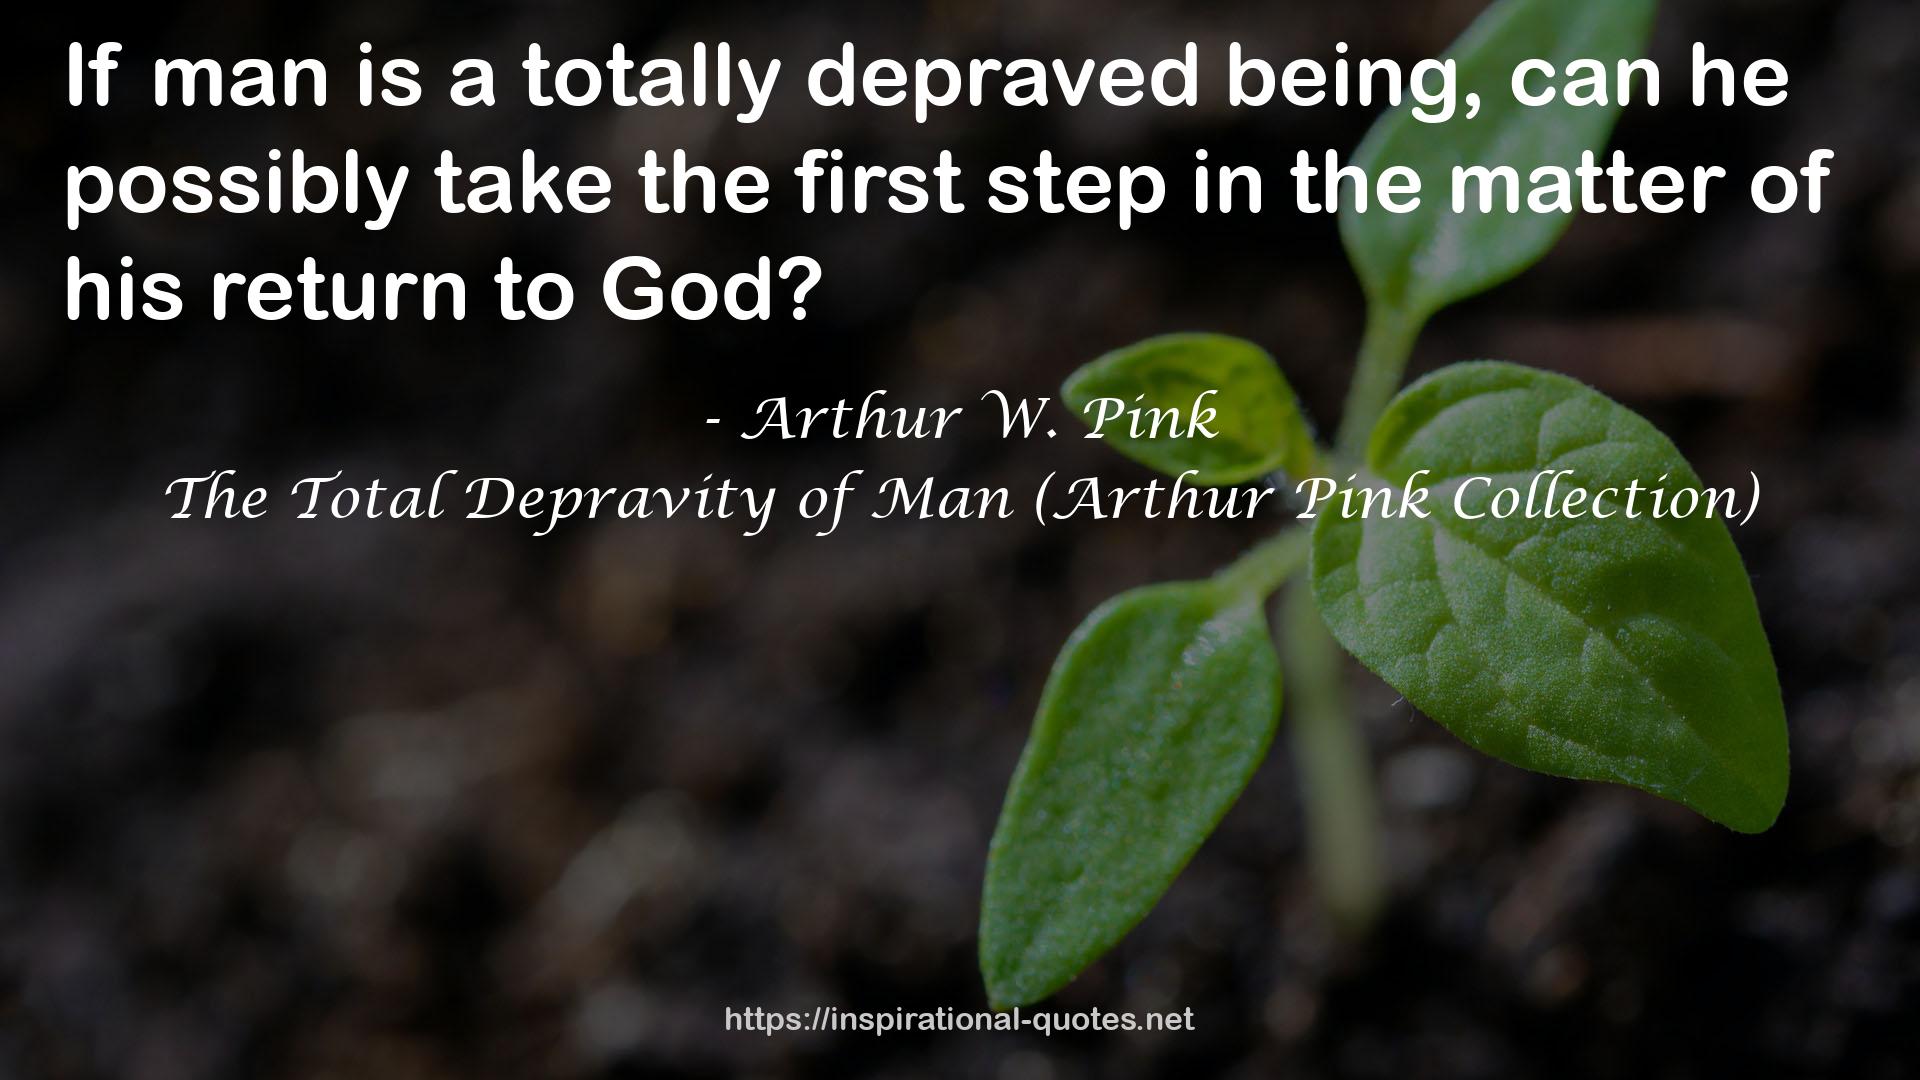 The Total Depravity of Man (Arthur Pink Collection) QUOTES